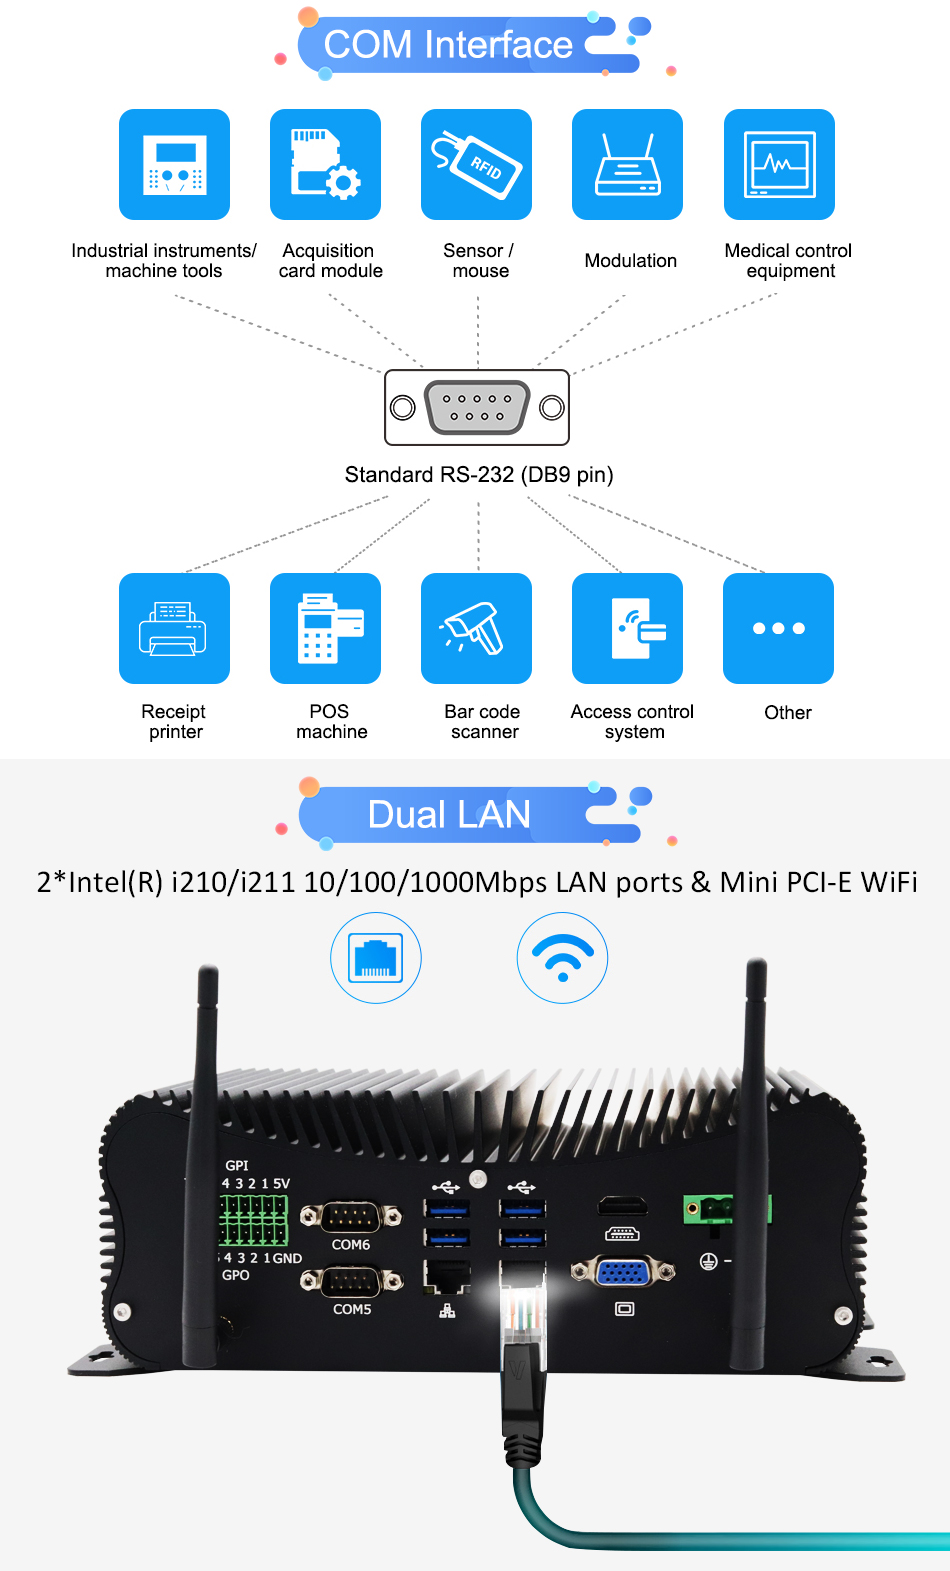 J4125 Router